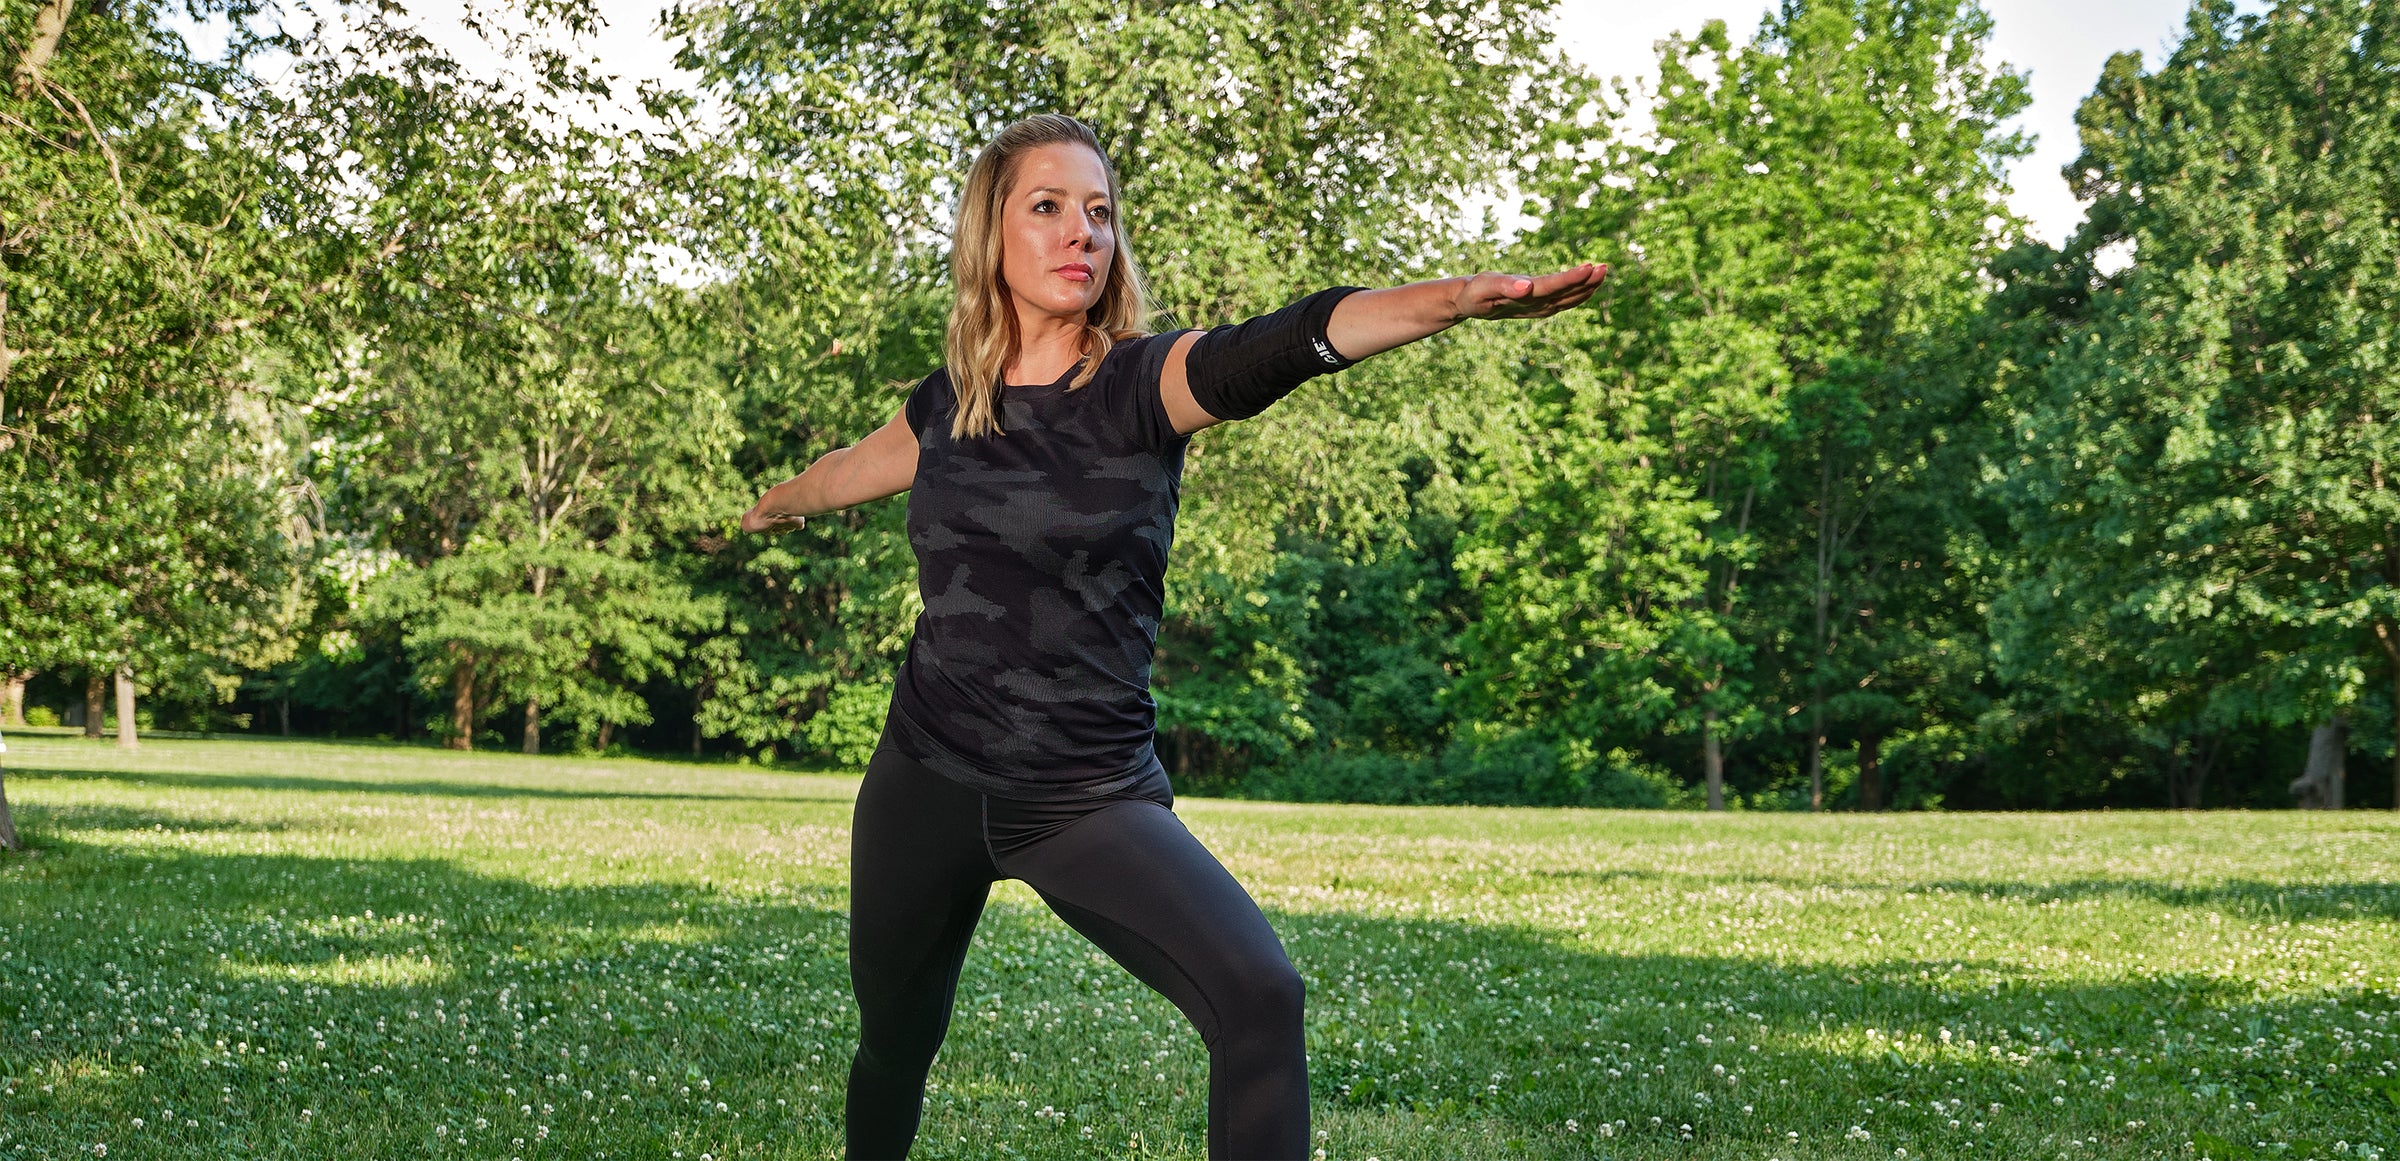 Resistance Band Leggings and Resistance Band Compression Elbow Sleeve shown in Forest Park